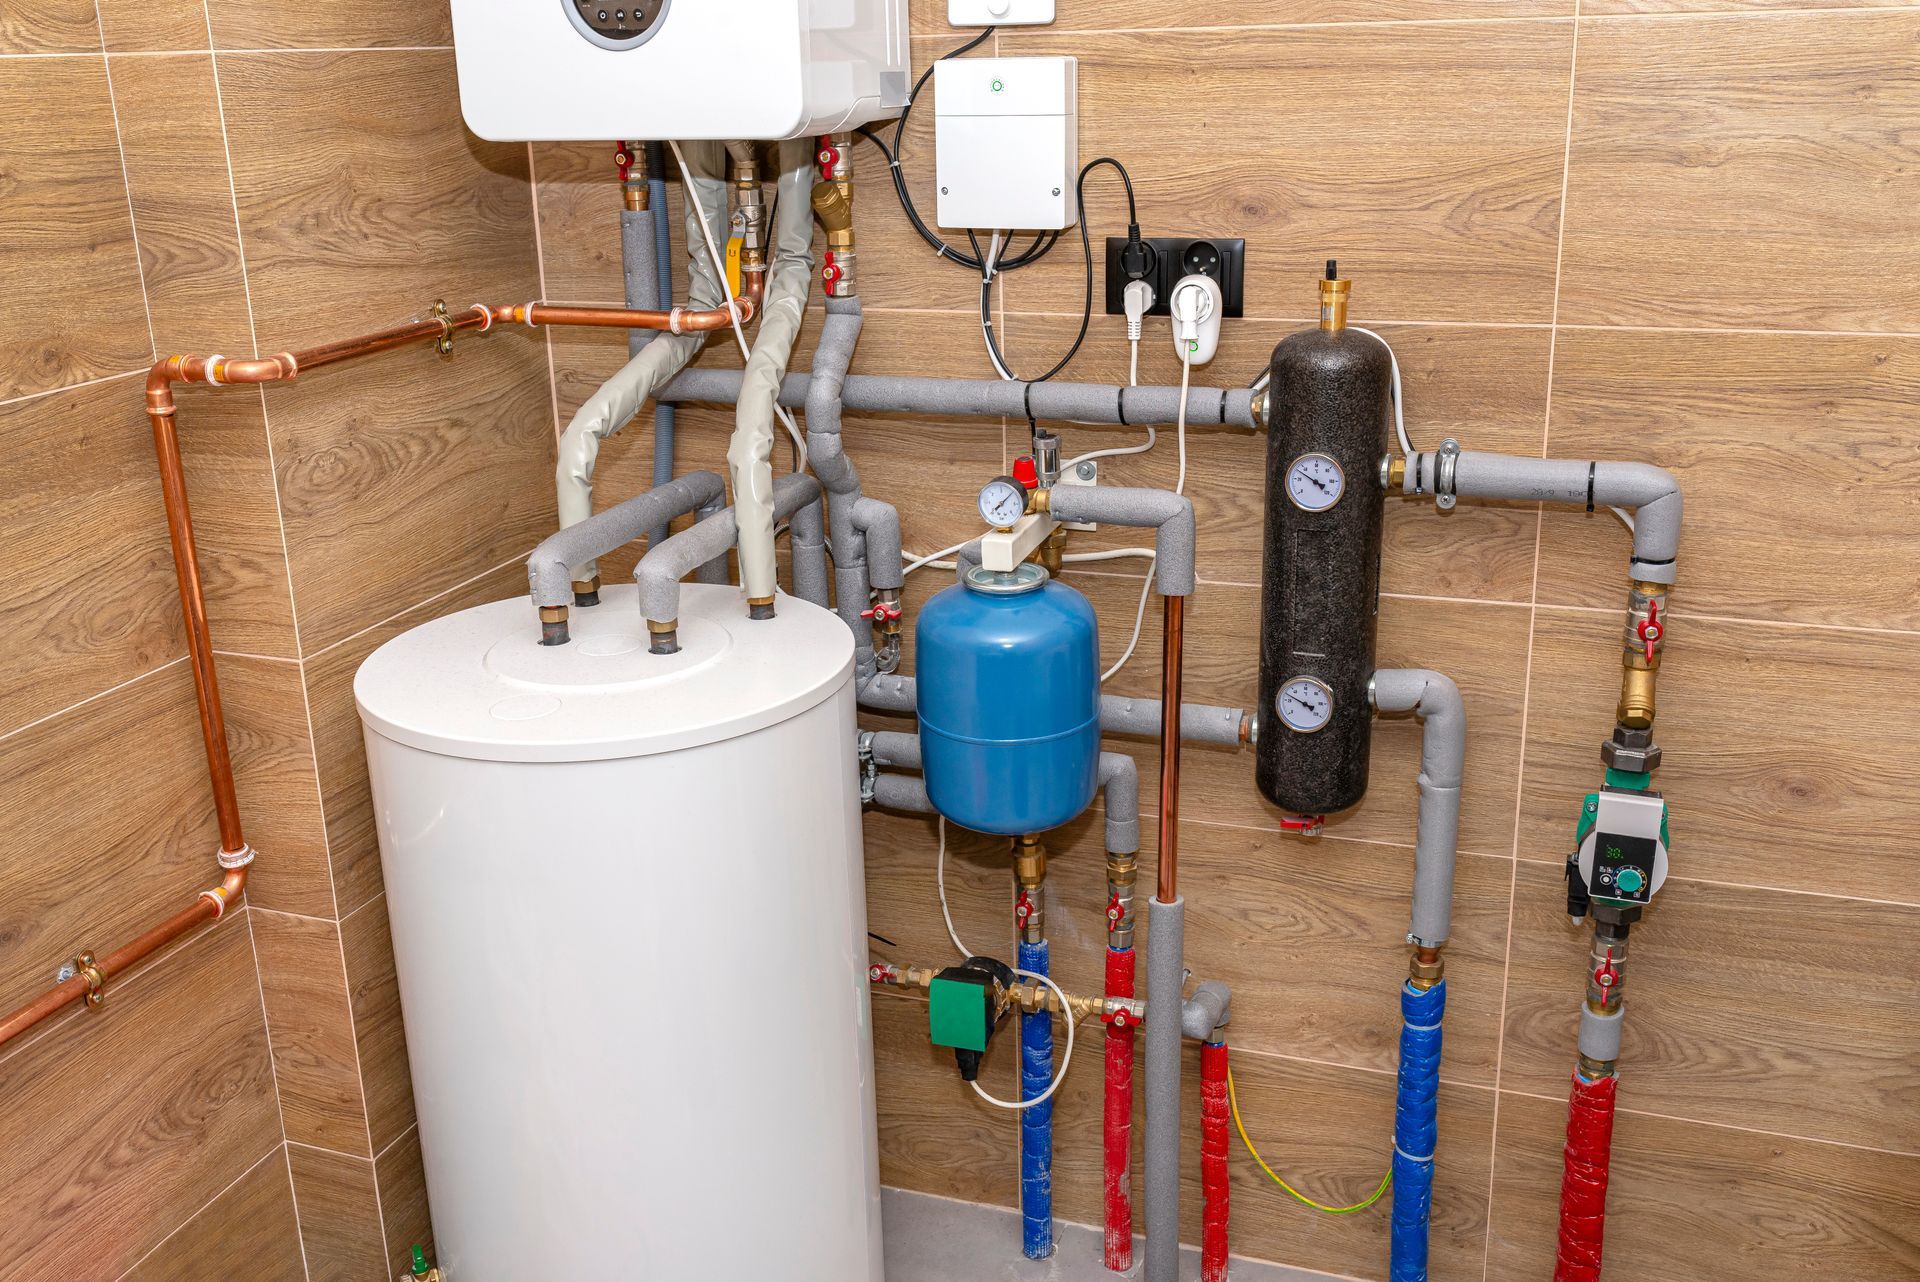 Modern natural gas boiler installed in a tiled boiler room with a visible 120 liter hot water tank.